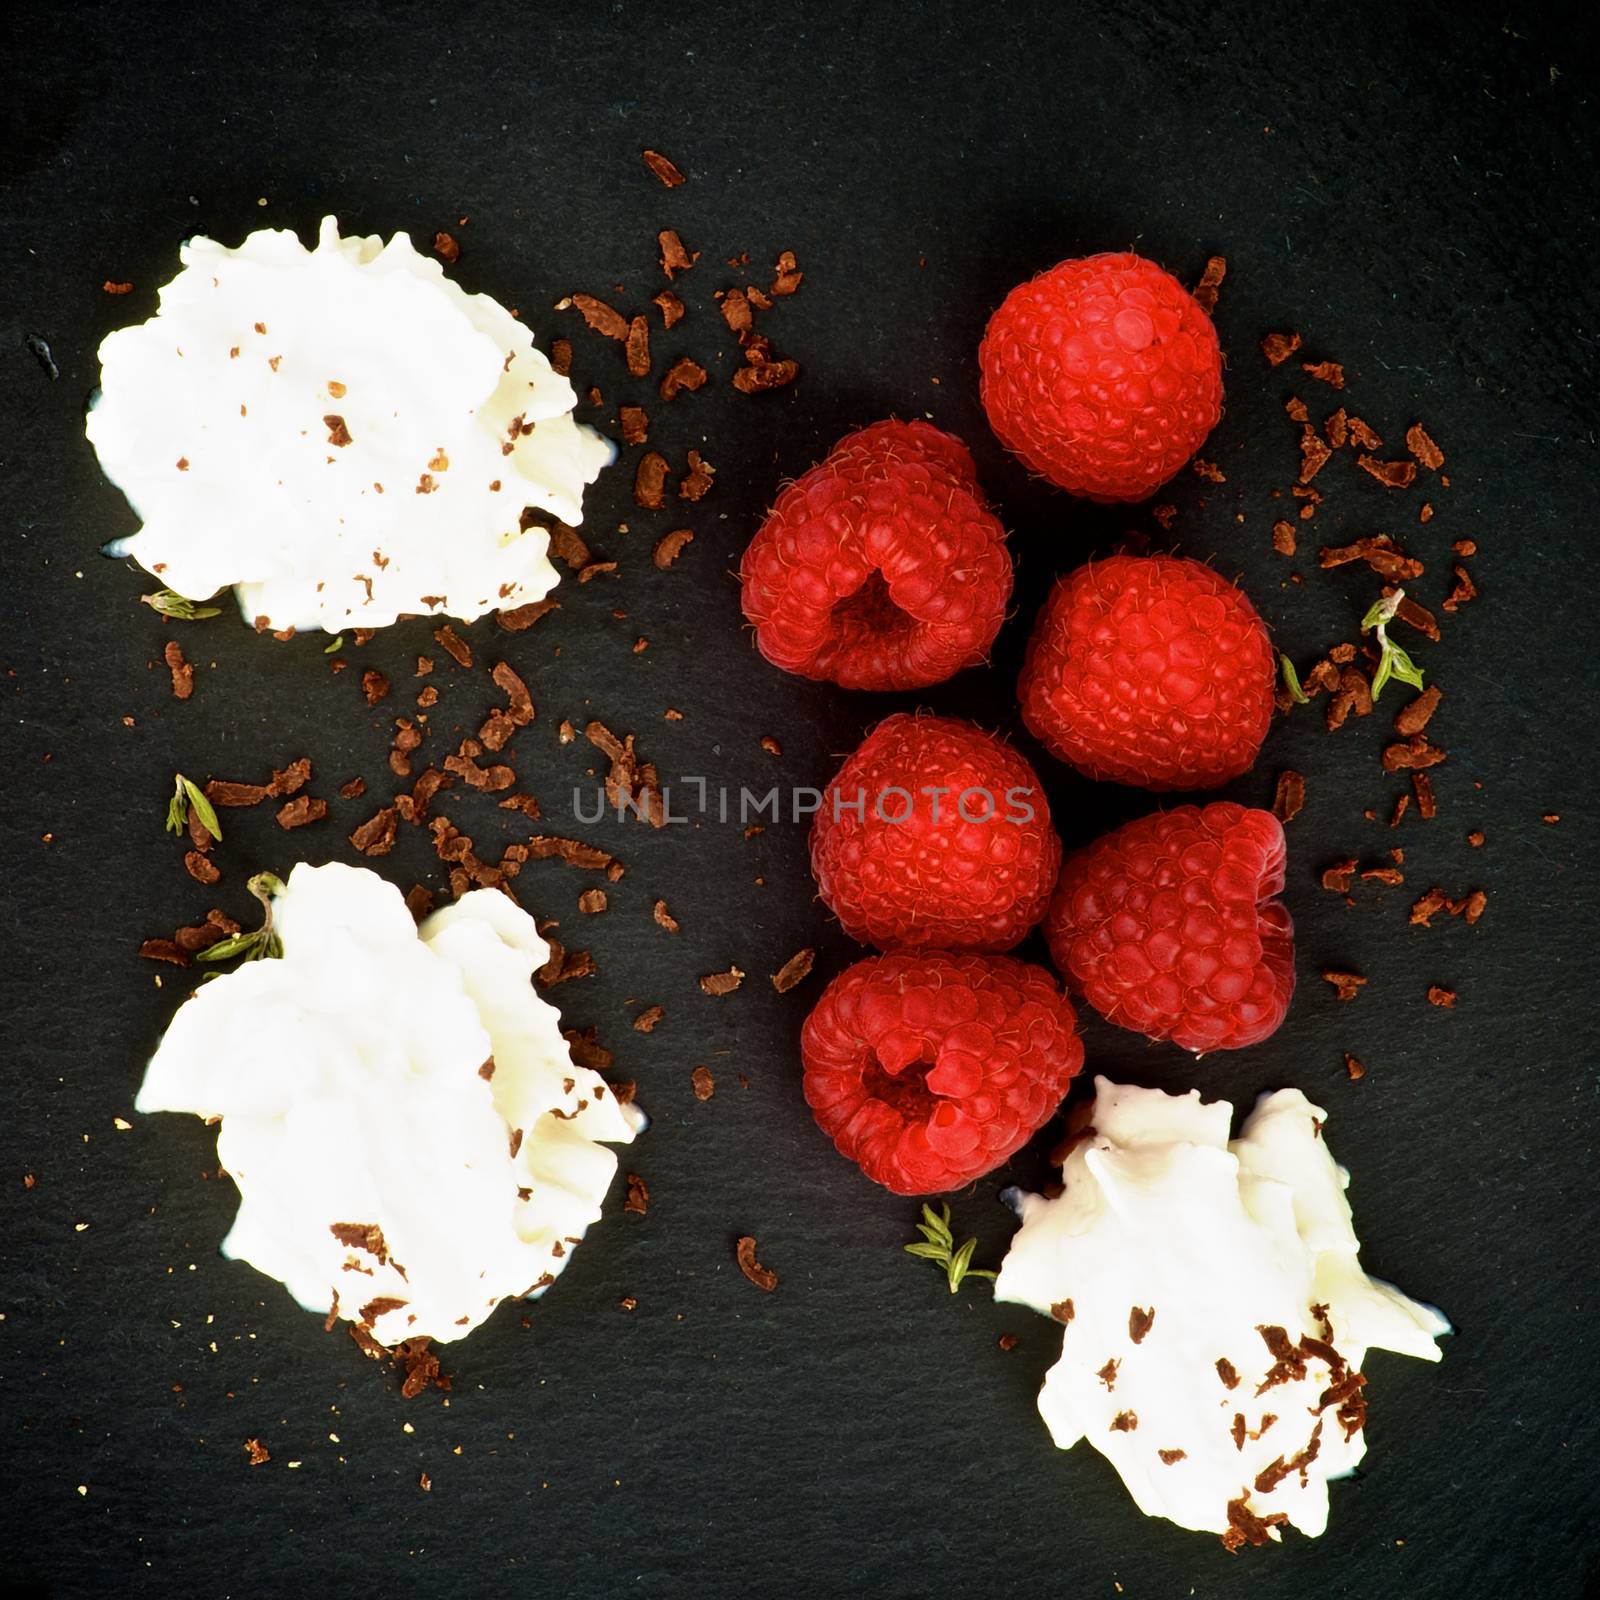 Delicious Dessert with Fresh Raspberries, Dairy Cream and Grated Dark Chocolate closeup on Black Plate. Top View